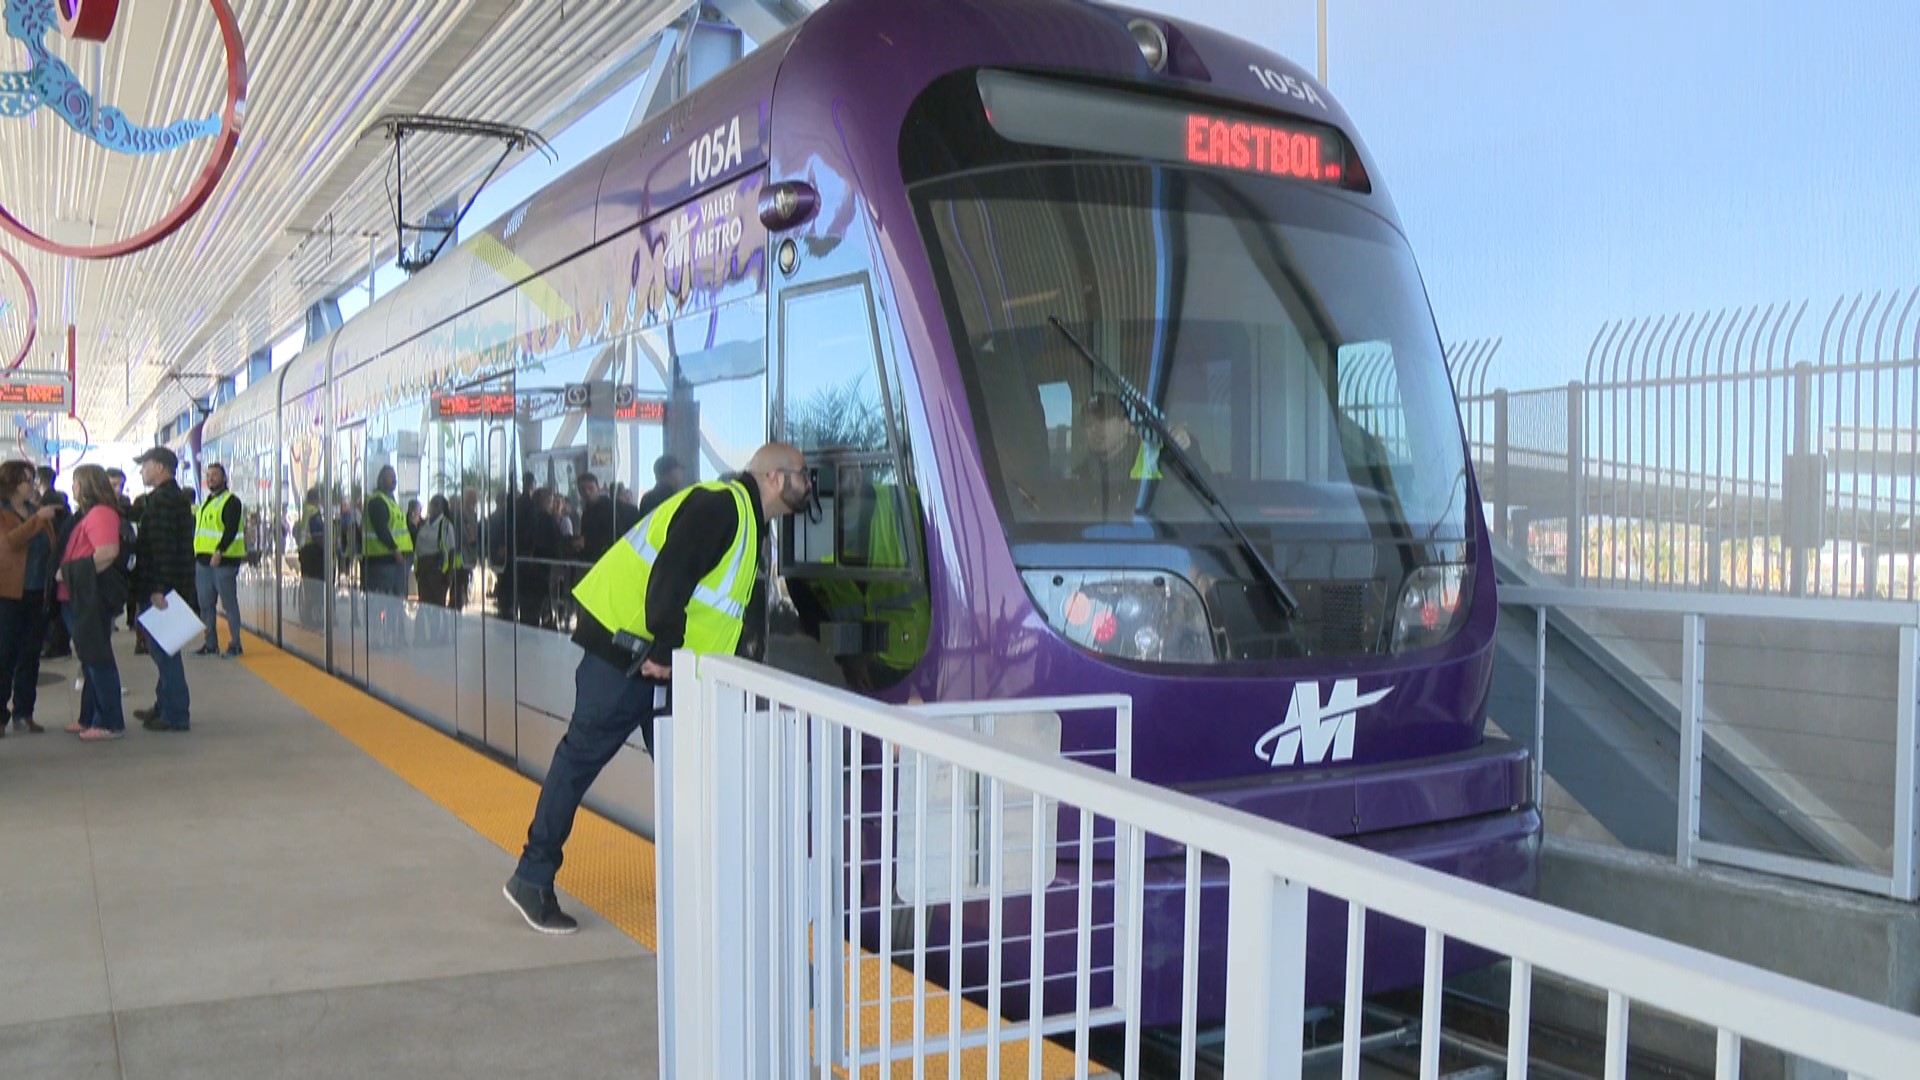 Valley Metro officially opened the northwest Phoenix light rail extension on Saturday and 12News was there for the ribbon cutting ceremony.